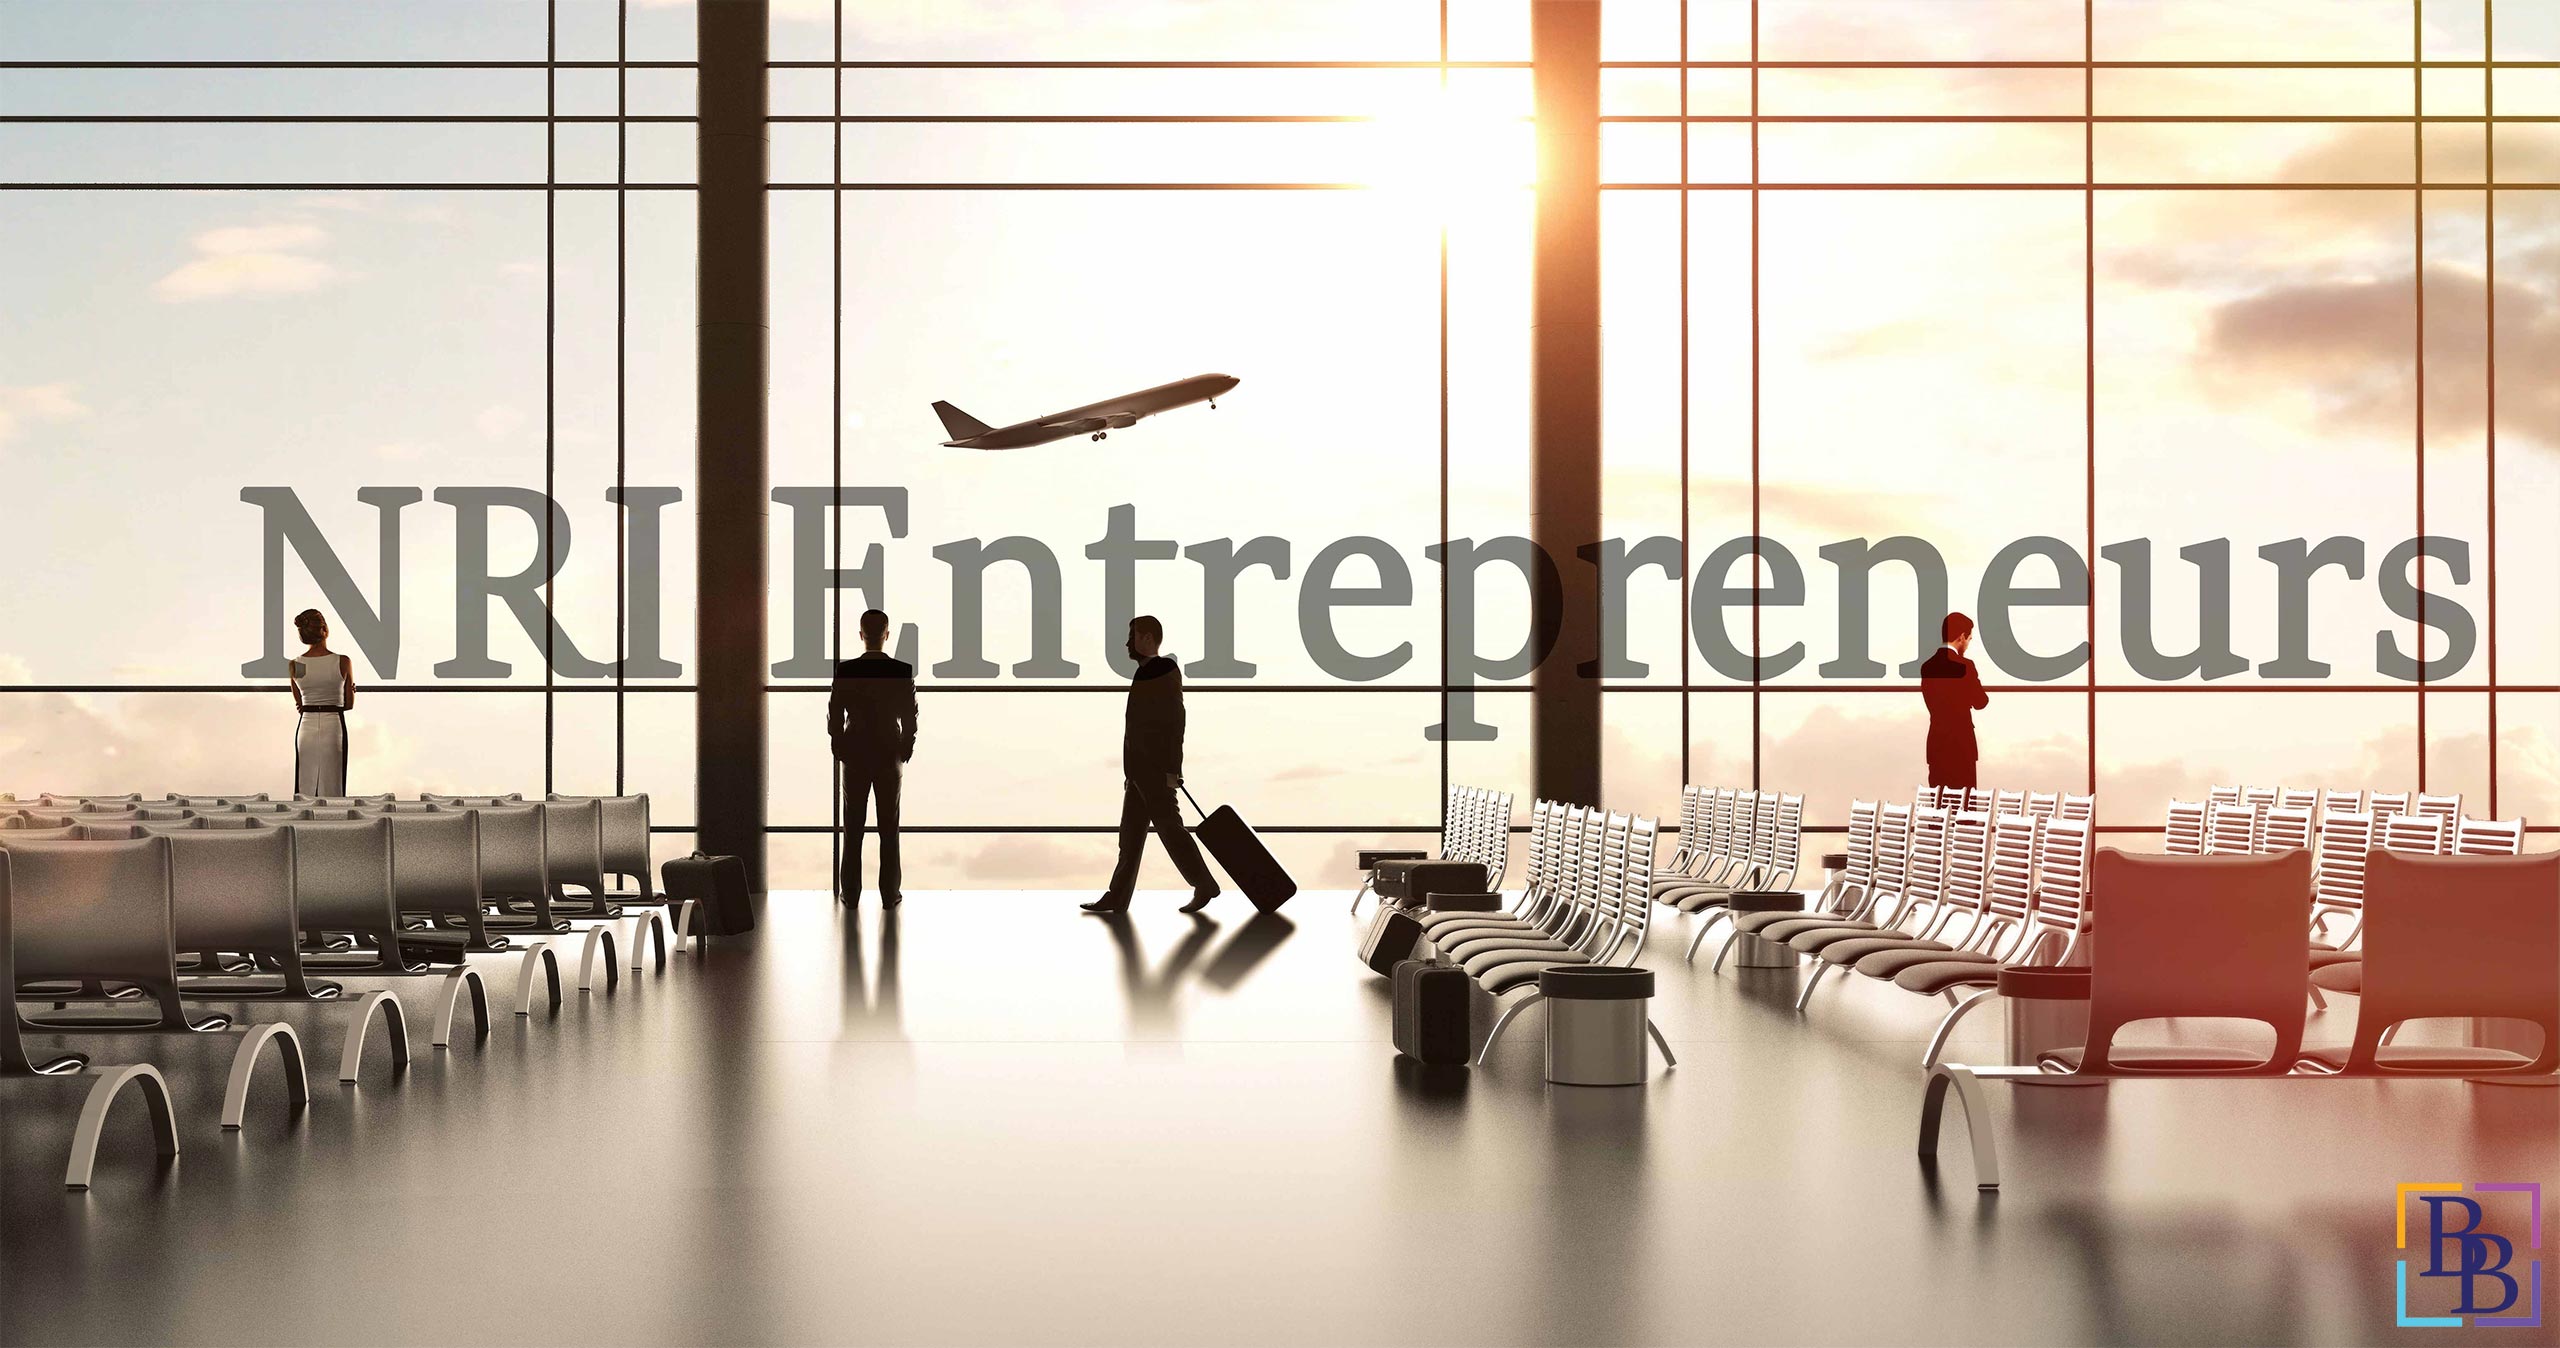 Best suited entity in India for NRI entrepreneurs to start a business